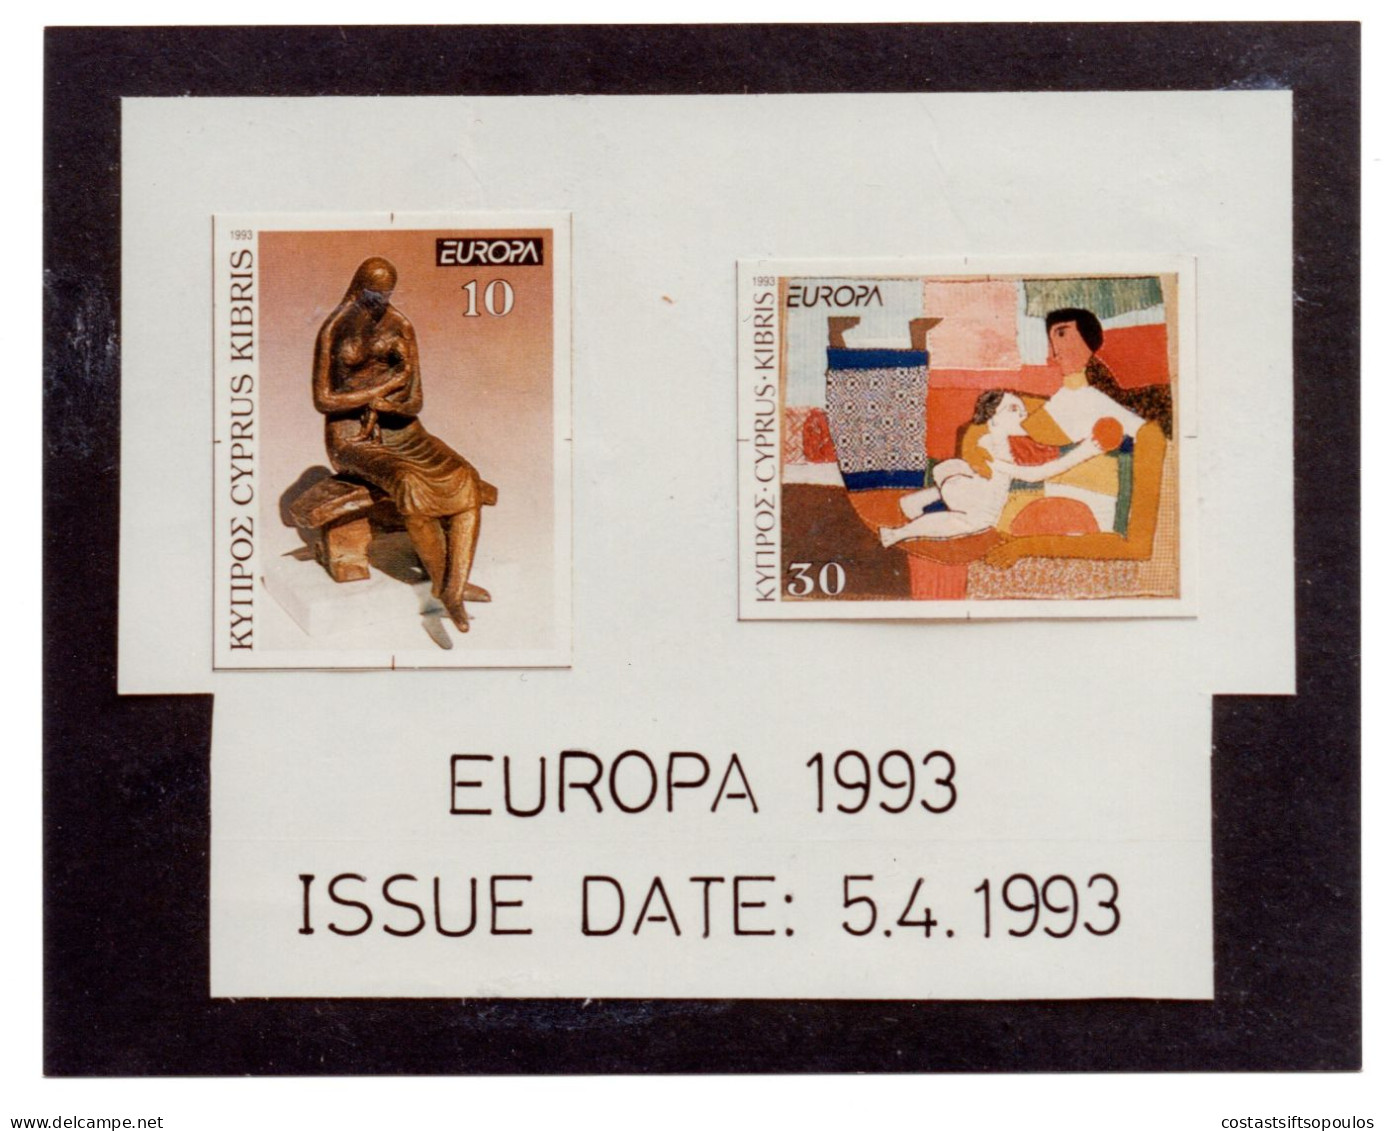 2496. CYPRUS 1993 EUROPA UNIDENTIFIED ITEM/PHOTO - Covers & Documents